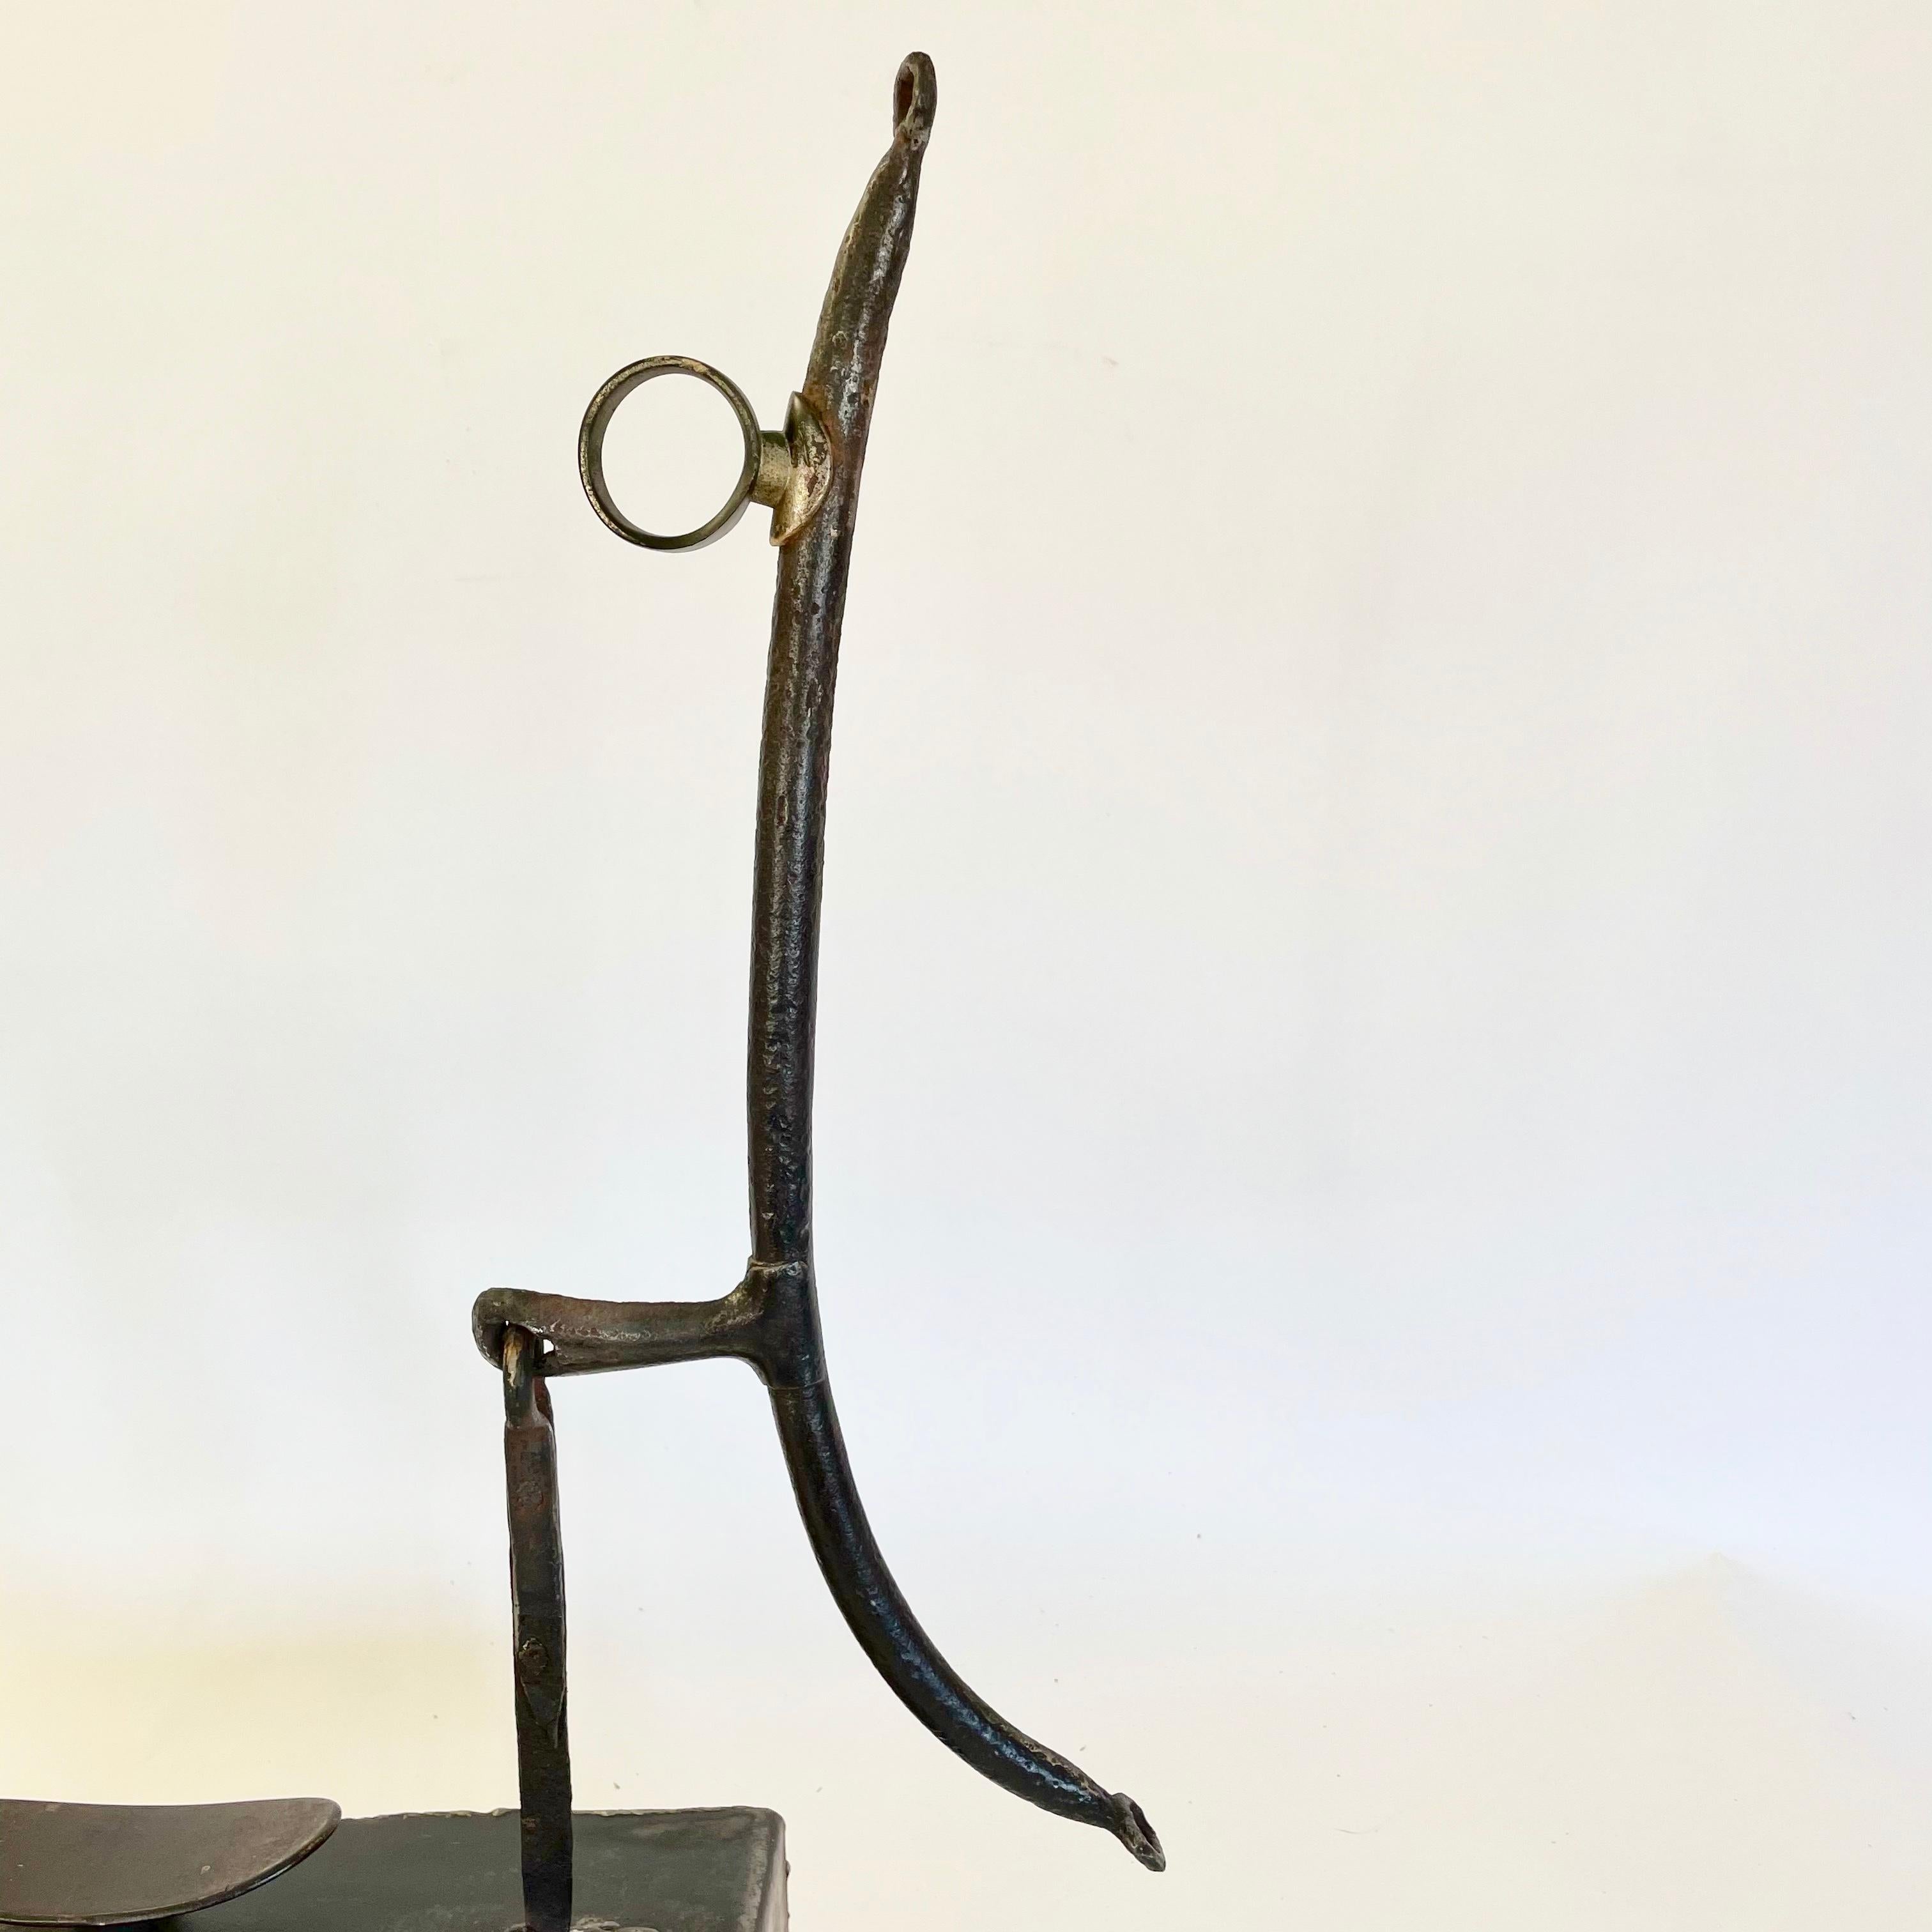 Altar II
welded steel
Measures: 5 x 18.5 x 23 in.

Artist statement:

I seldom use stock material, but prefer distressed and rusted steel that has been scarred, bent, and made imperfect. In this state, the material becomes quite beautiful. There are